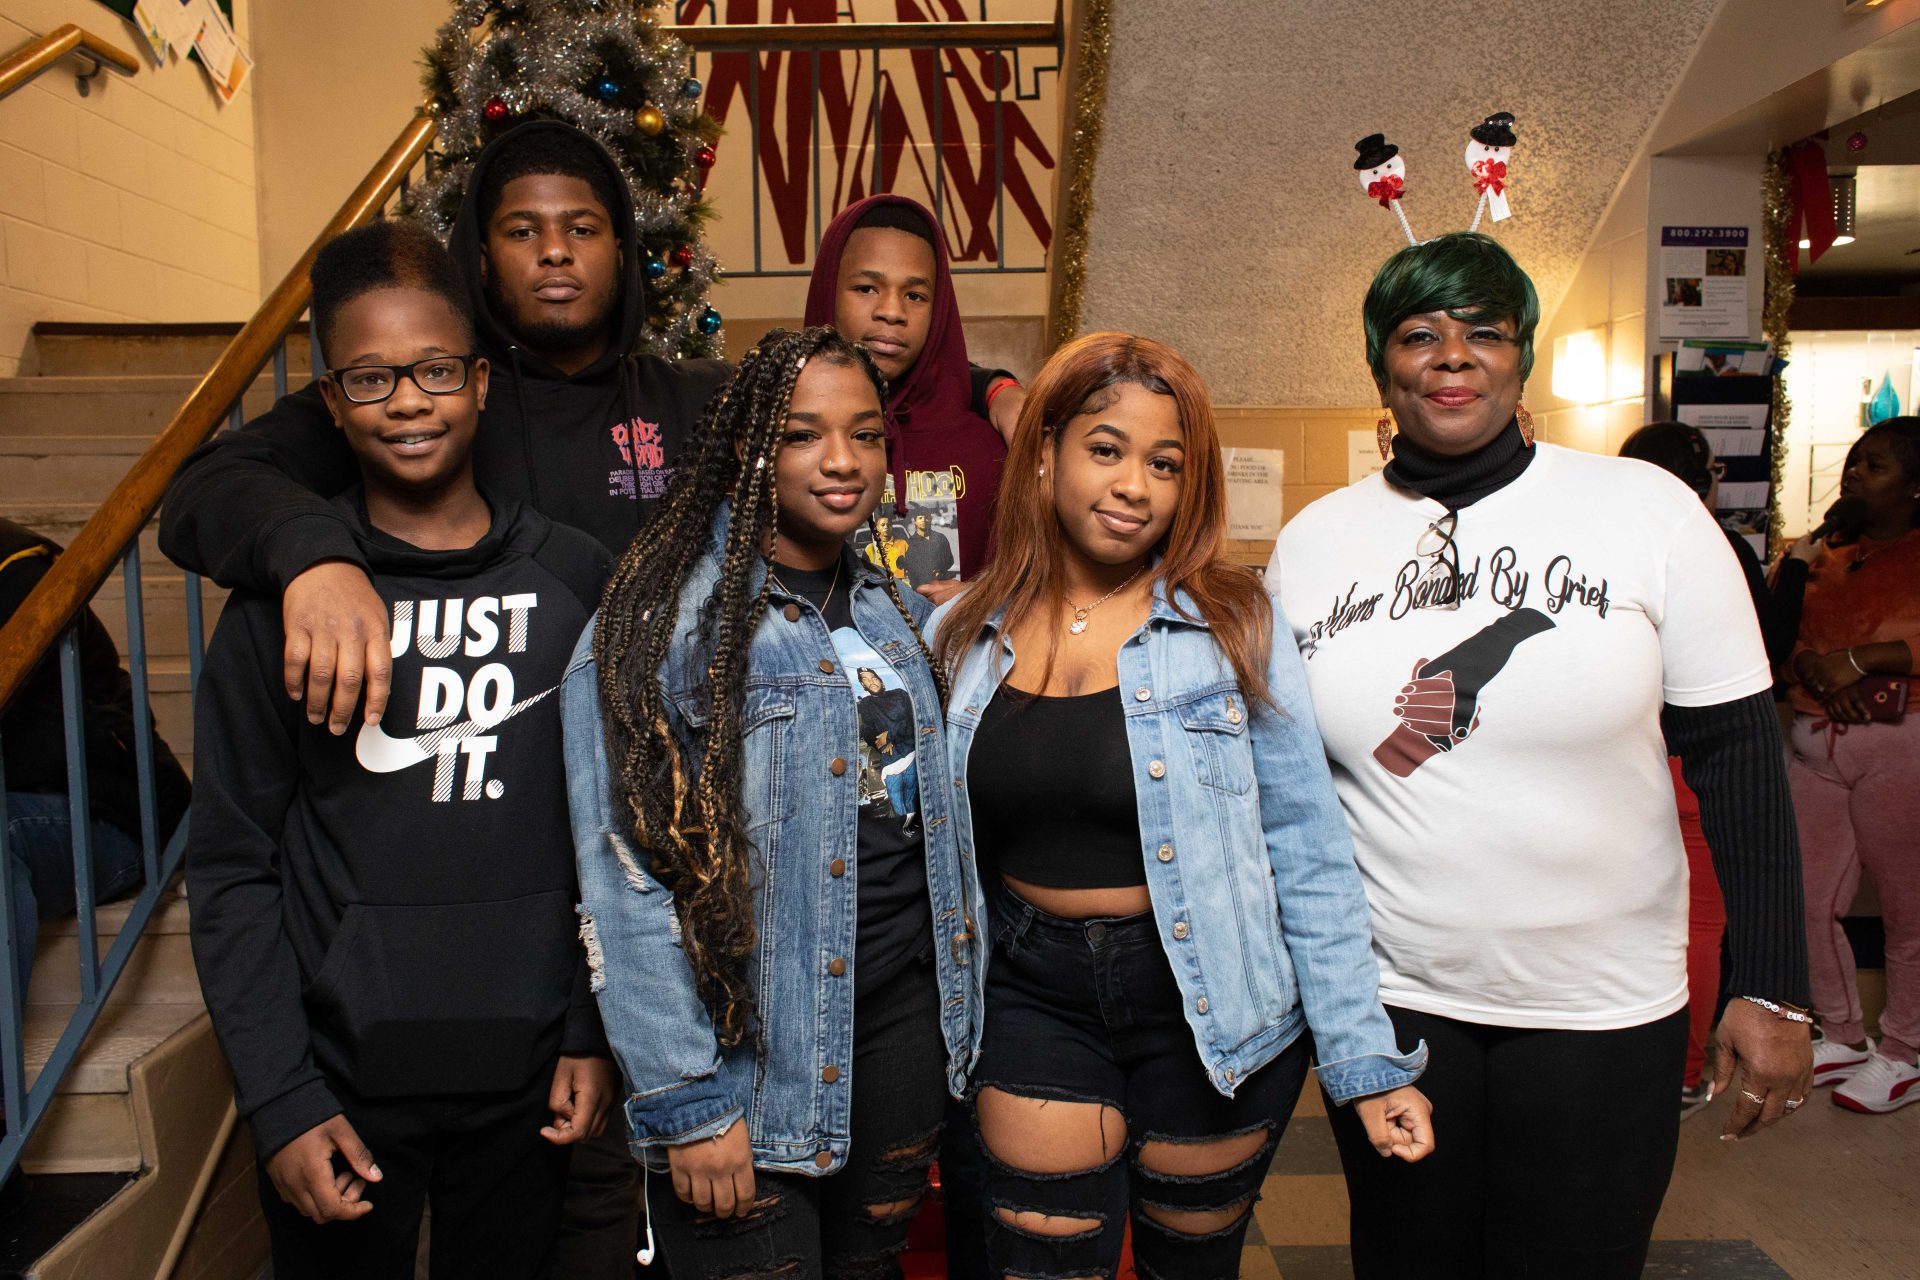 Lisa Harmon (right) attended the Moms Bonded By Grief holiday party in South Philadelphia on Sunday with her grandchildren and son. Lisa's son Alan Gray was killed last year. Pictured is Shahir Hamilton, Shawn Harmon, Aniyah Hamilton-Gray, Amir Hamilton-Gray, Sakiyah Hamilton-Gray and Lisa Harmon.